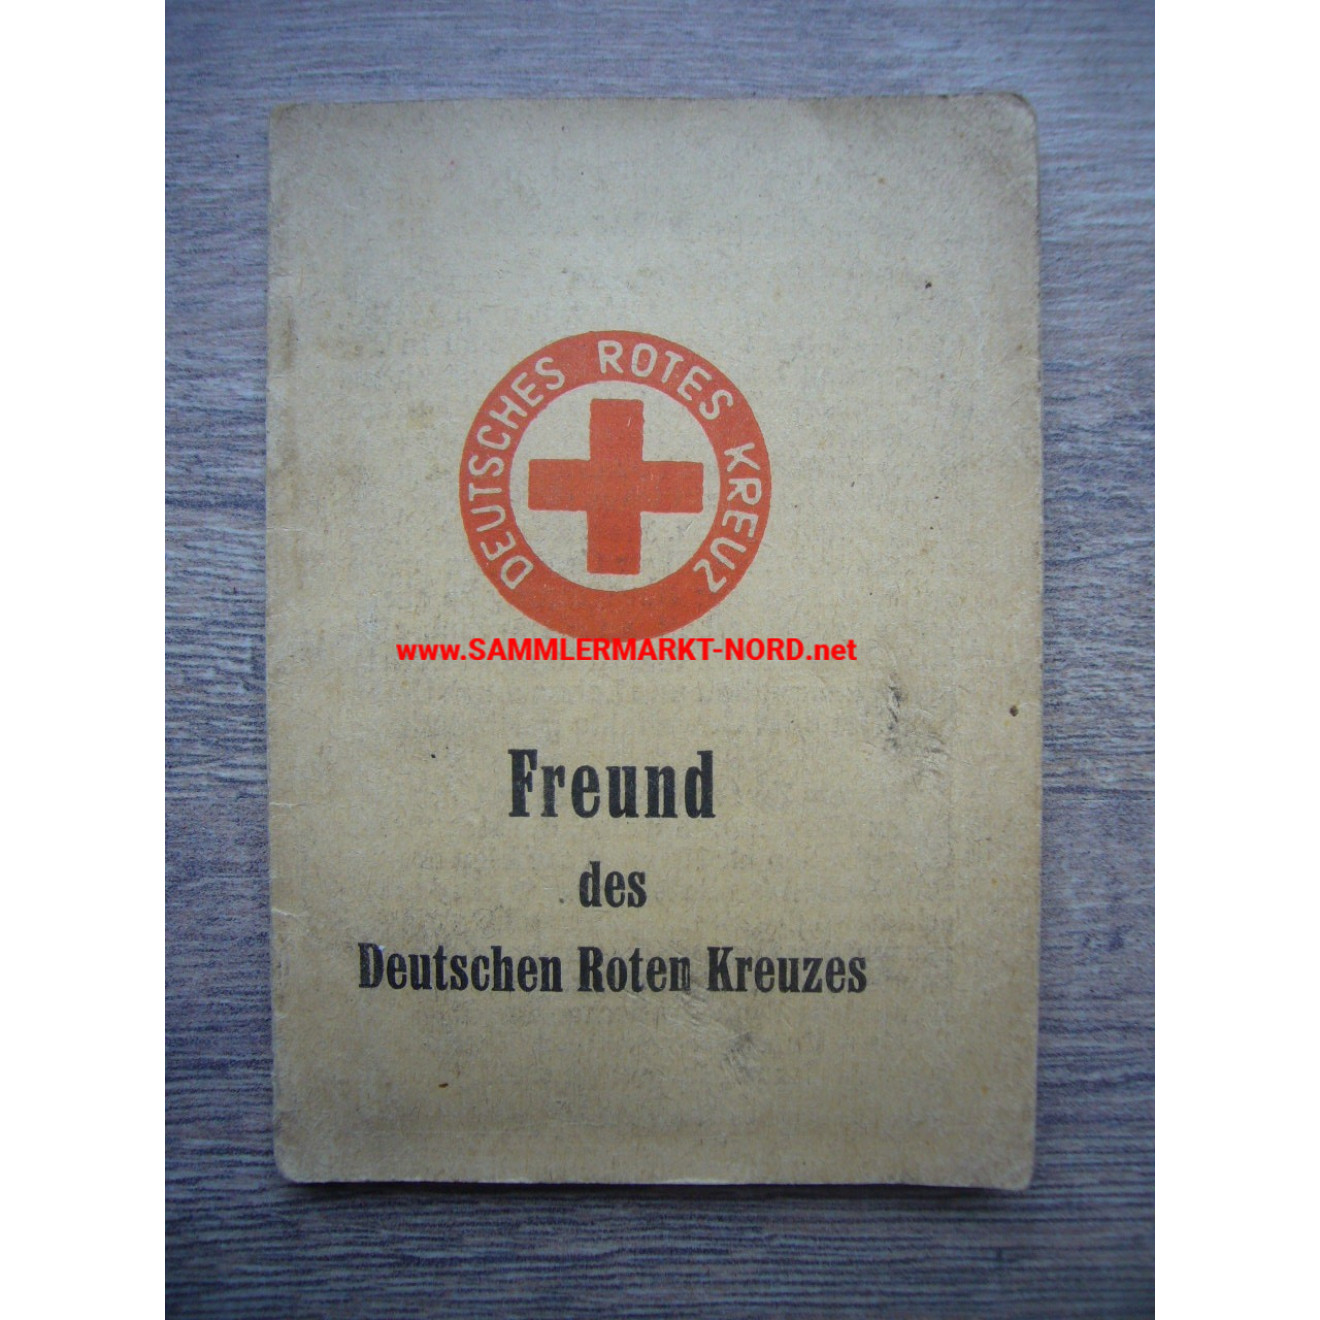 DDR - Friend of the German Red Cross - ID card